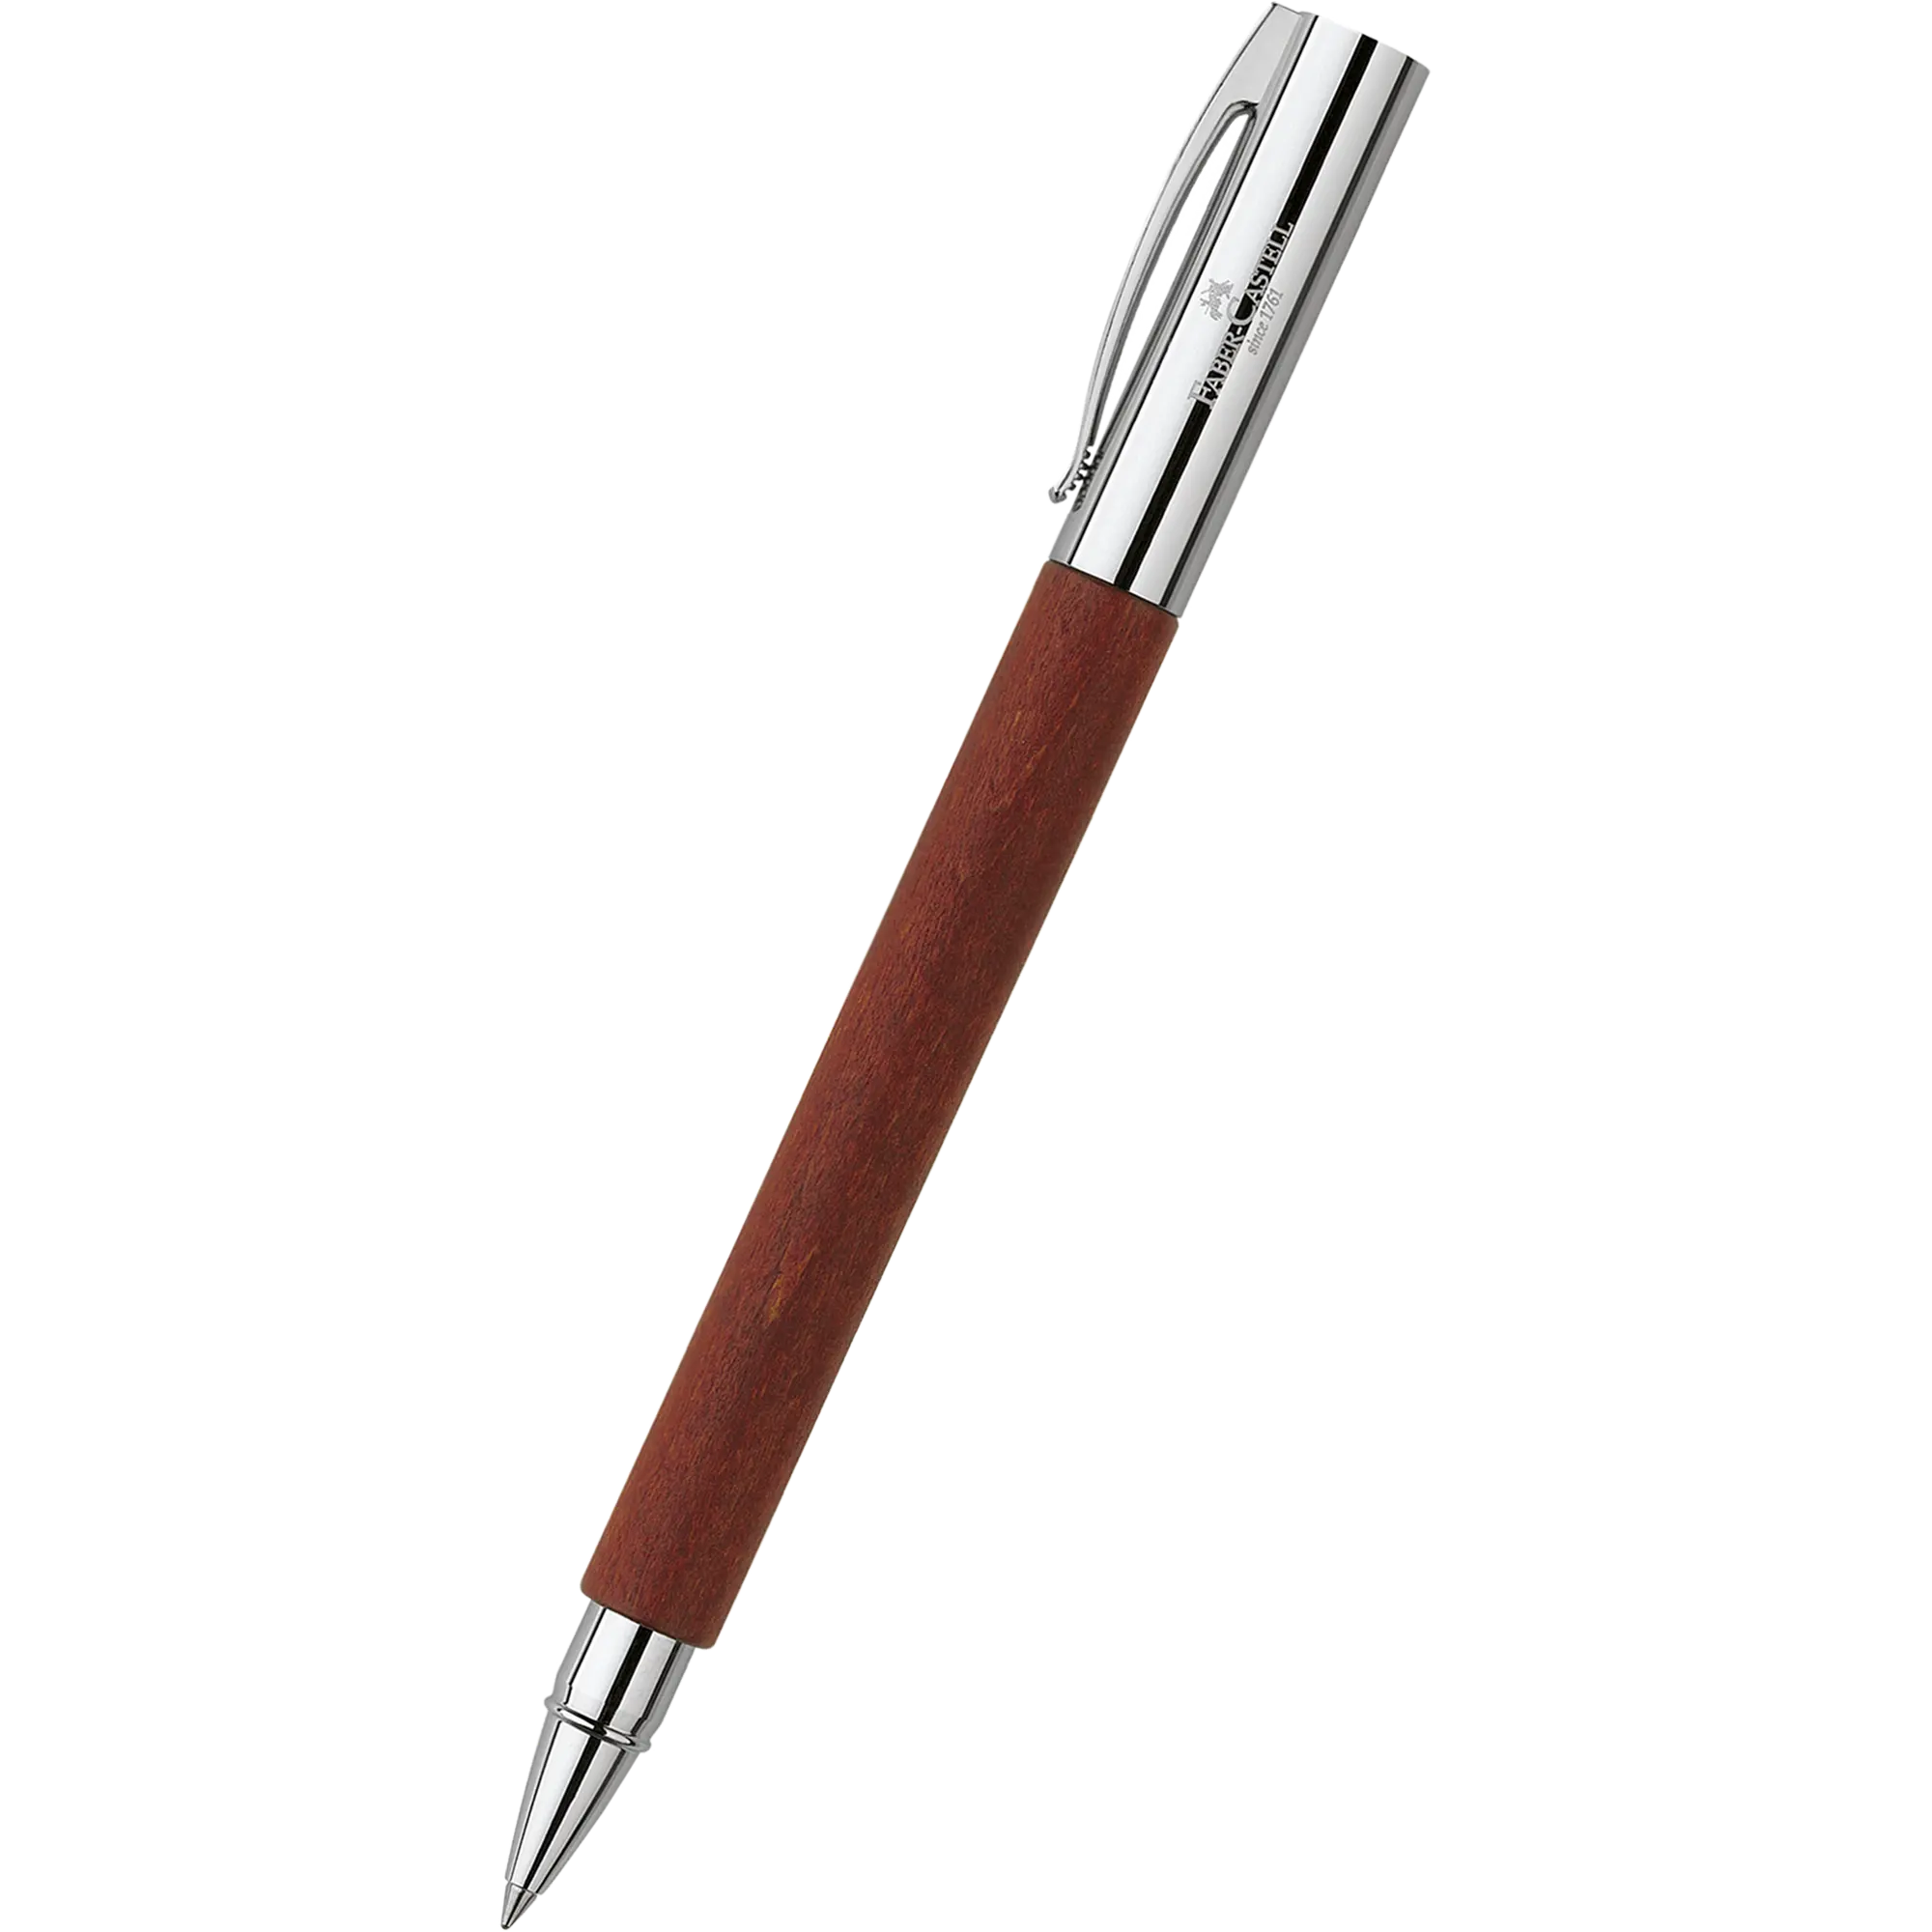 Faber-Castell Ambition Rollerball Pen - Pearwood-Pen Boutique Ltd